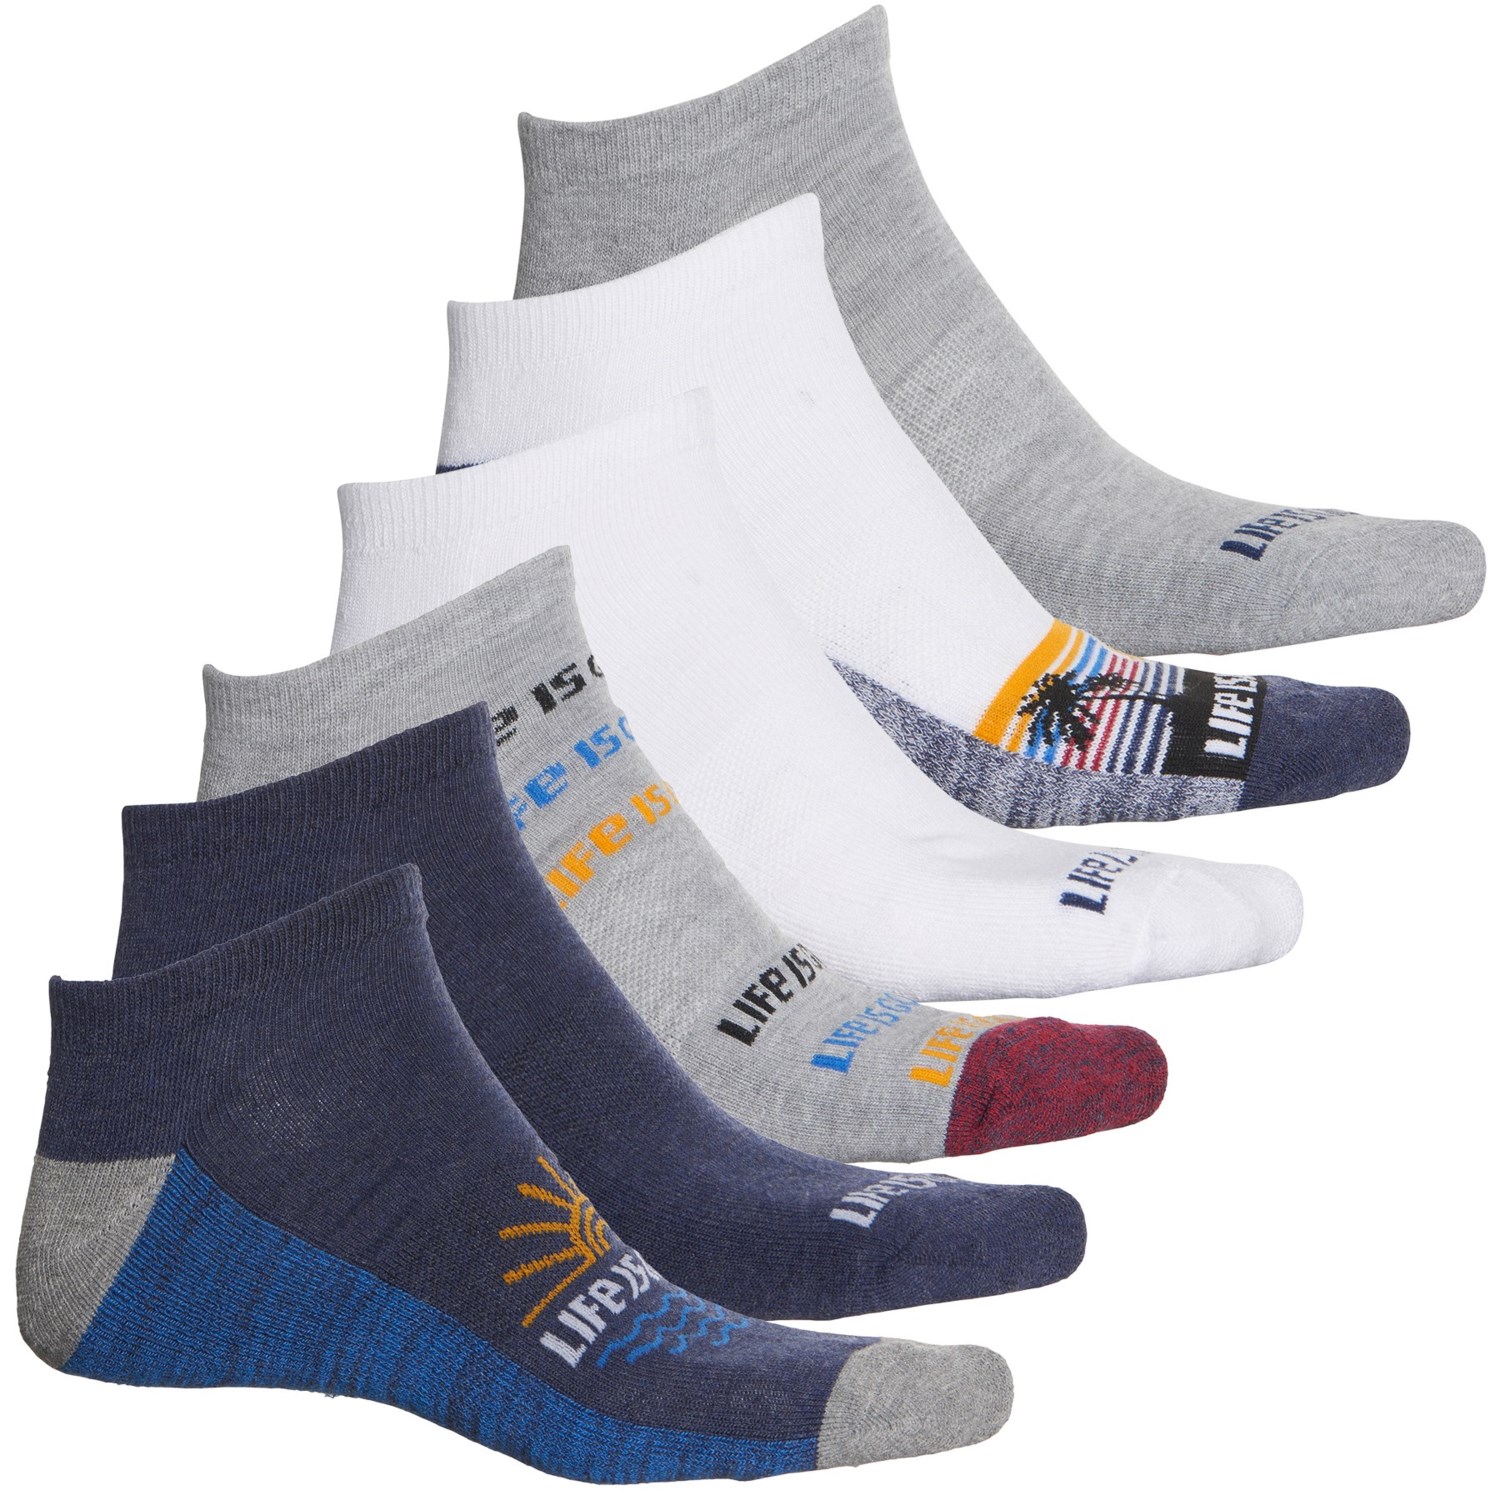 Life is good® Athletic Low-Cut Socks (For Men) - Save 33%